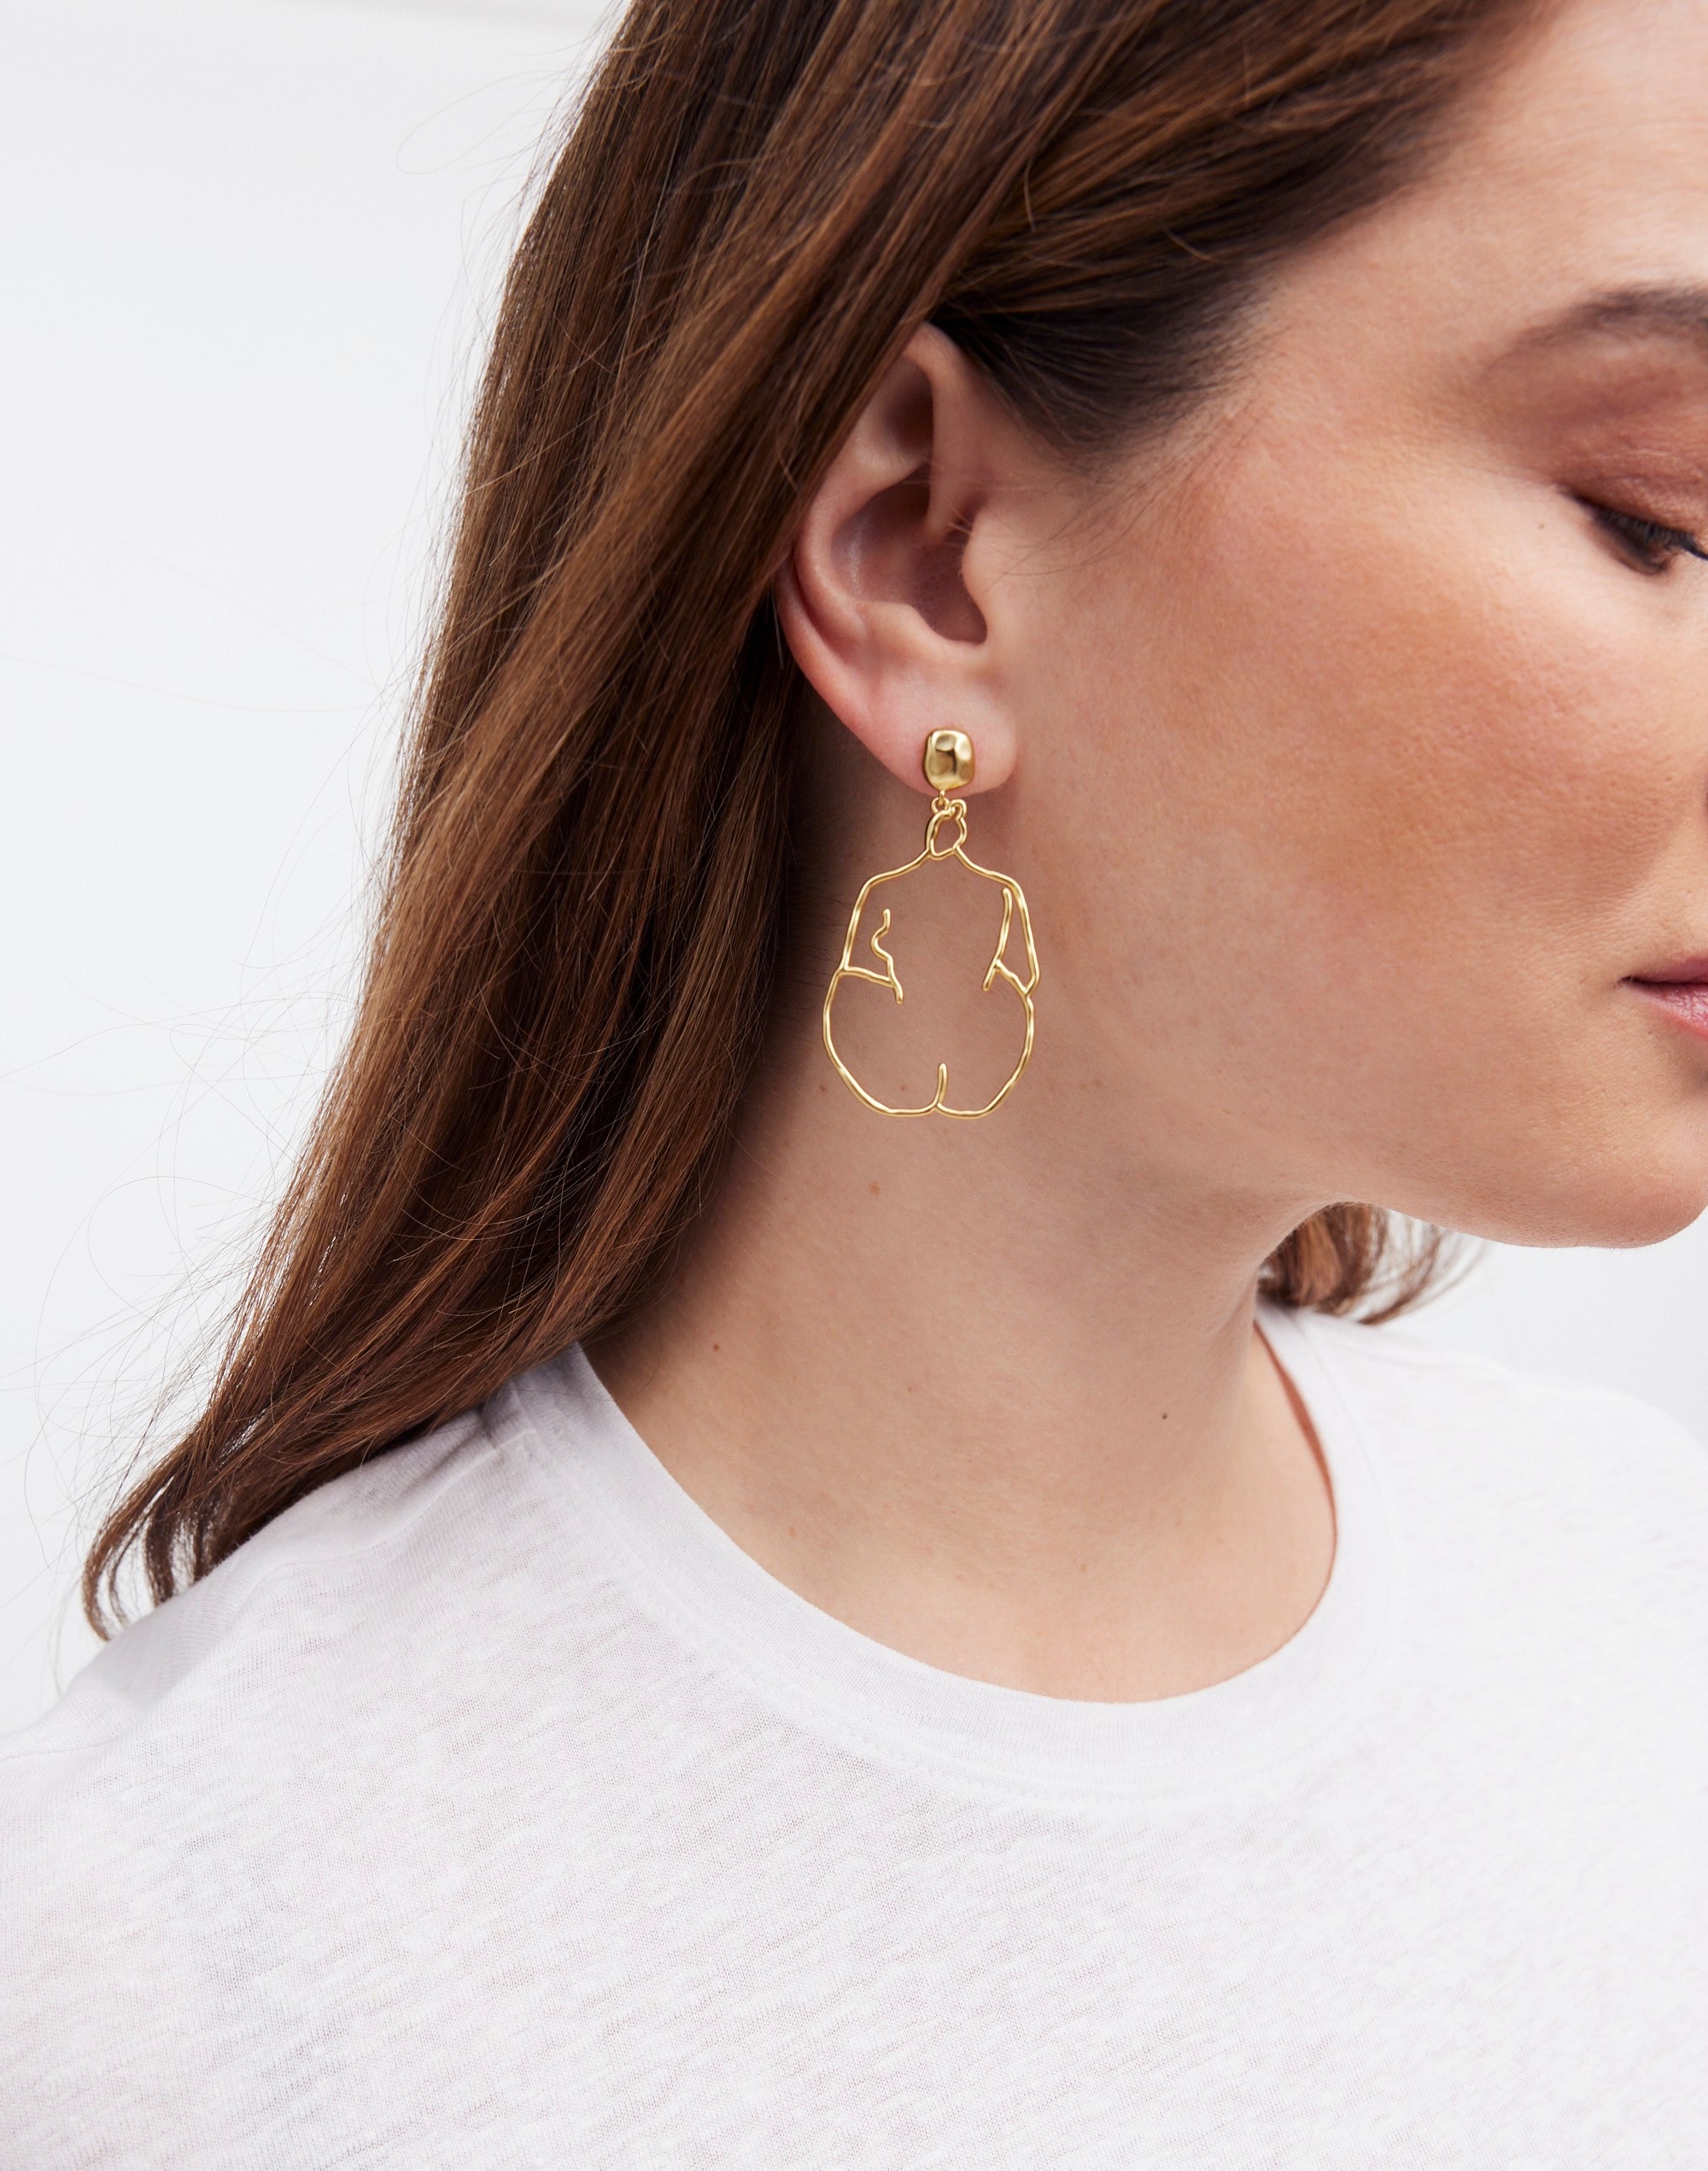 Madewell x Laetitia Rouget Statement Drop Earrings